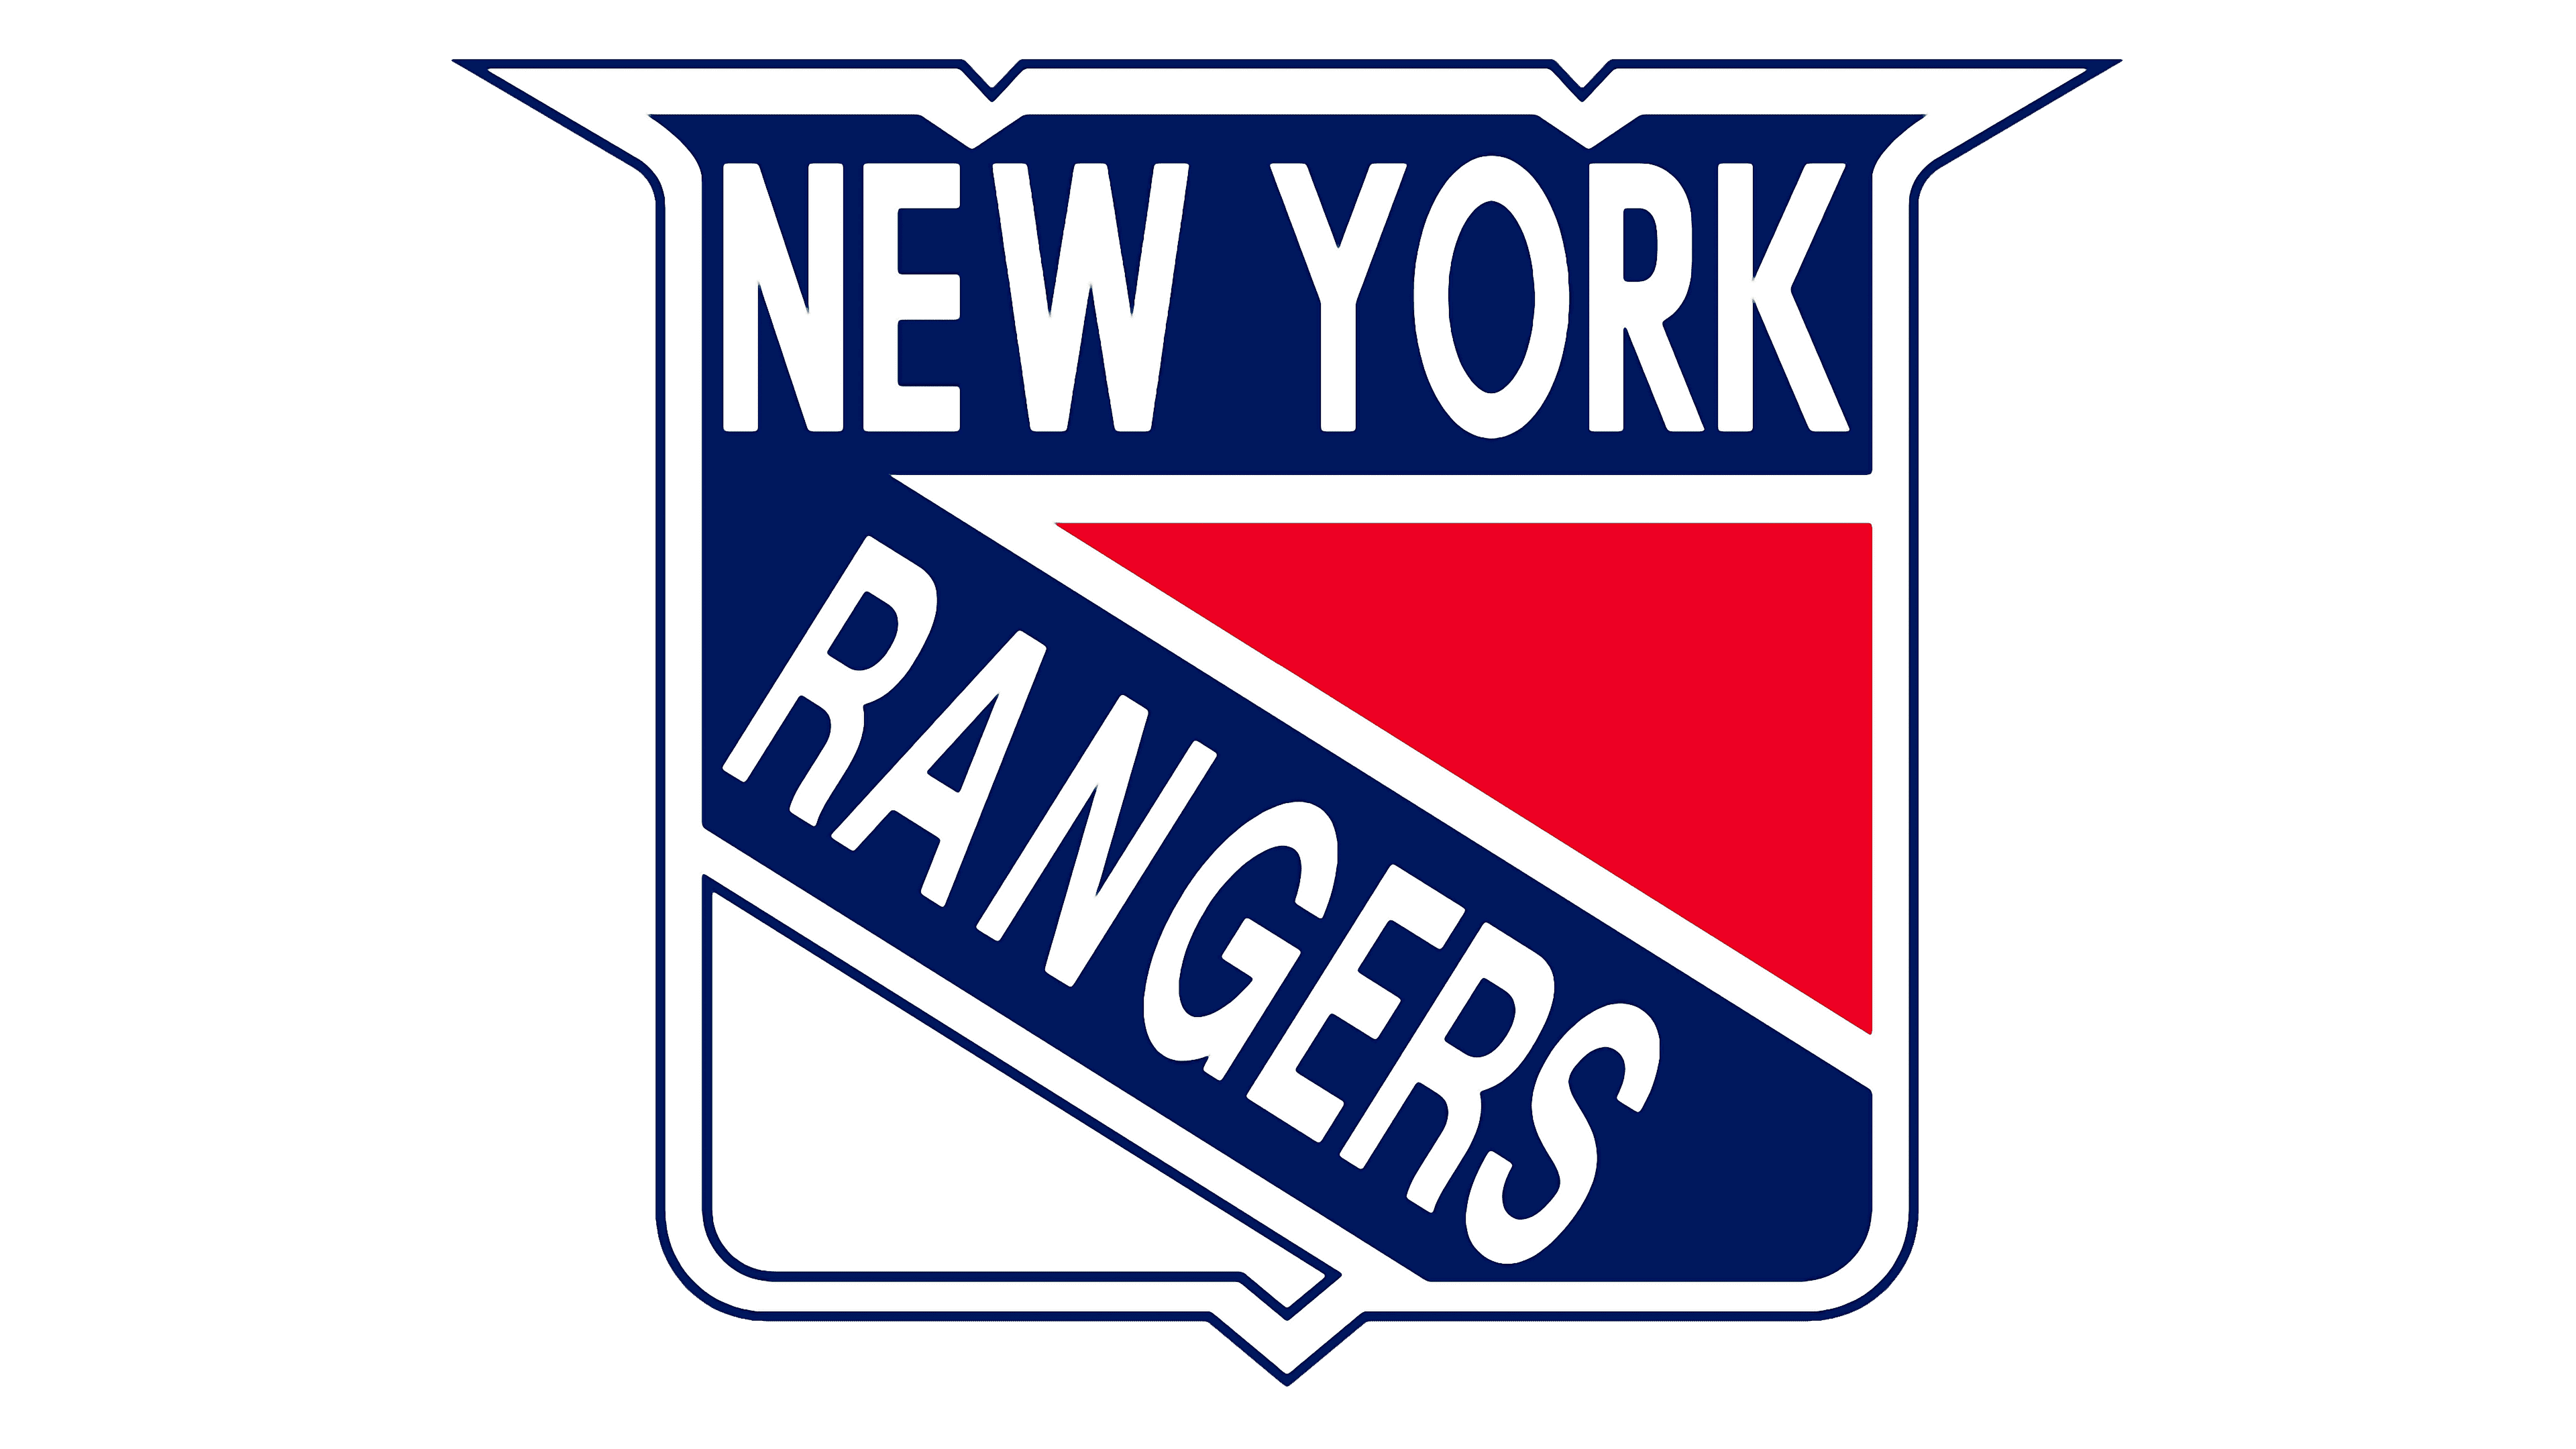 New York Rangers Logo The Most Famous Brands And Company Logos In The World